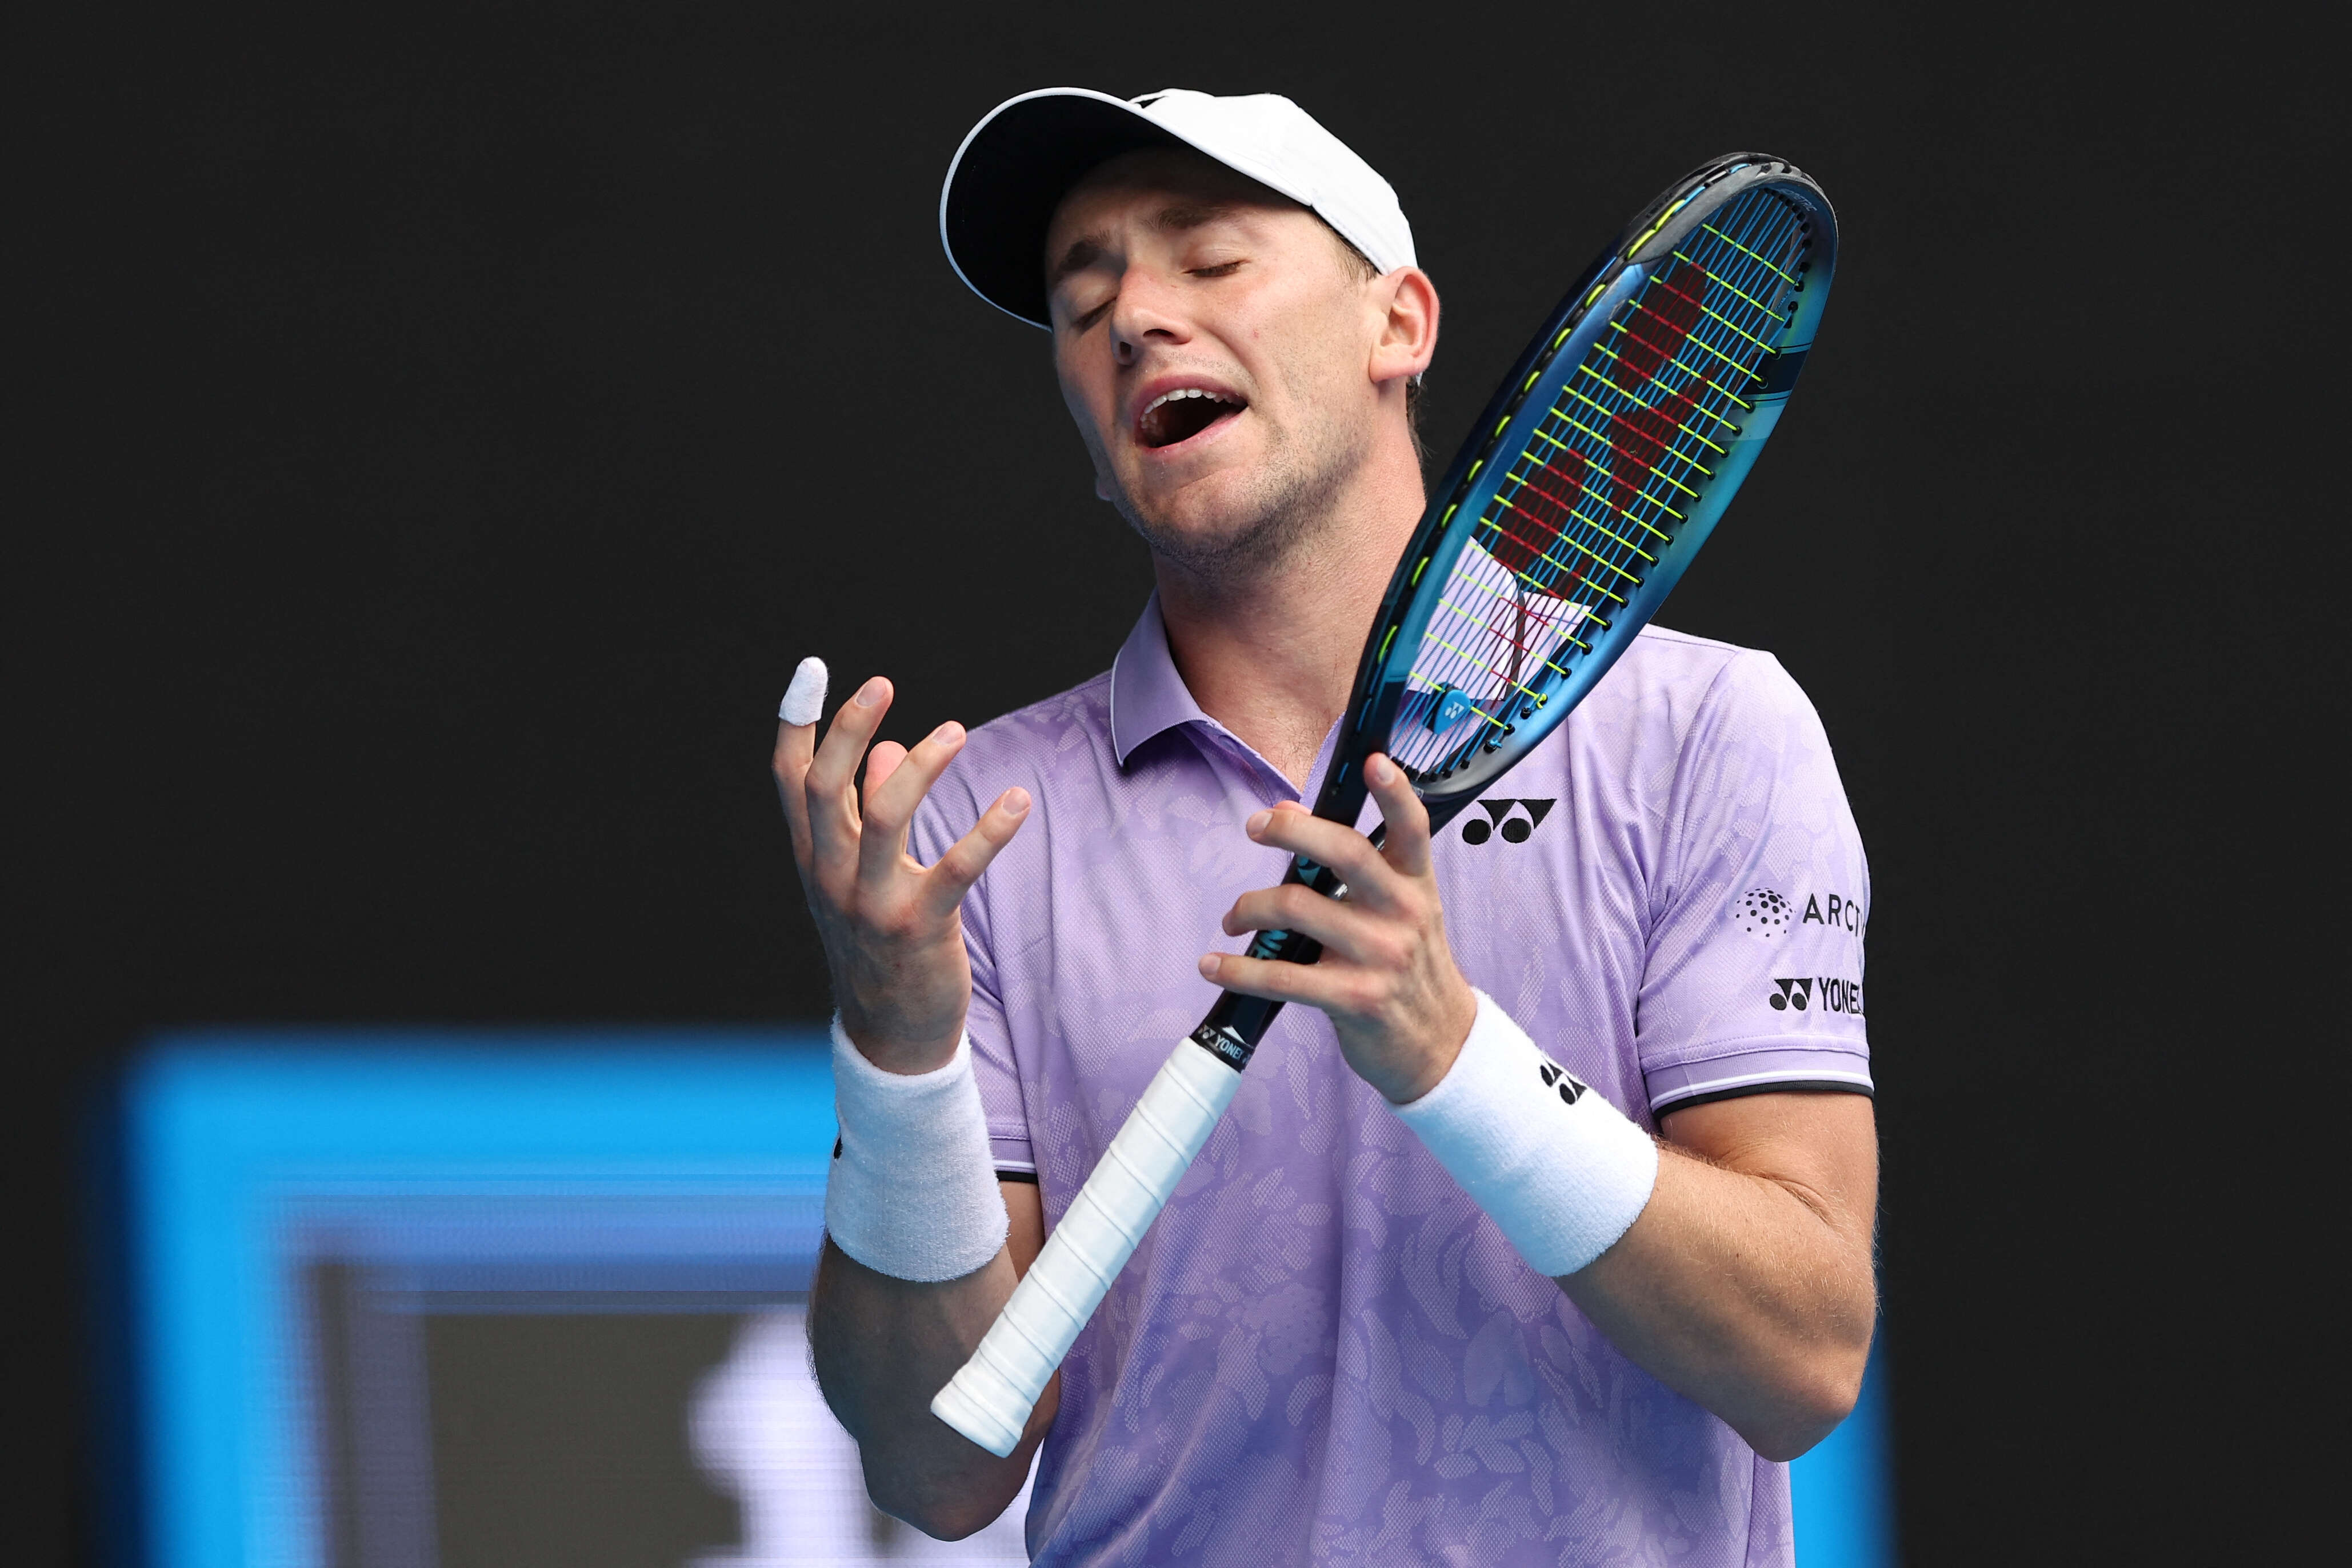 Norway's Casper Ruud reacts as he plays against USA's Jenson Brooksby during their men's singles match on day four of the Australian Open tennis tournament in Melbourne on January 19, 2023. (Photo by Martin KEEP / AFP) / -- IMAGE RESTRICTED TO EDITORIAL USE - STRICTLY NO COMMERCIAL USE --